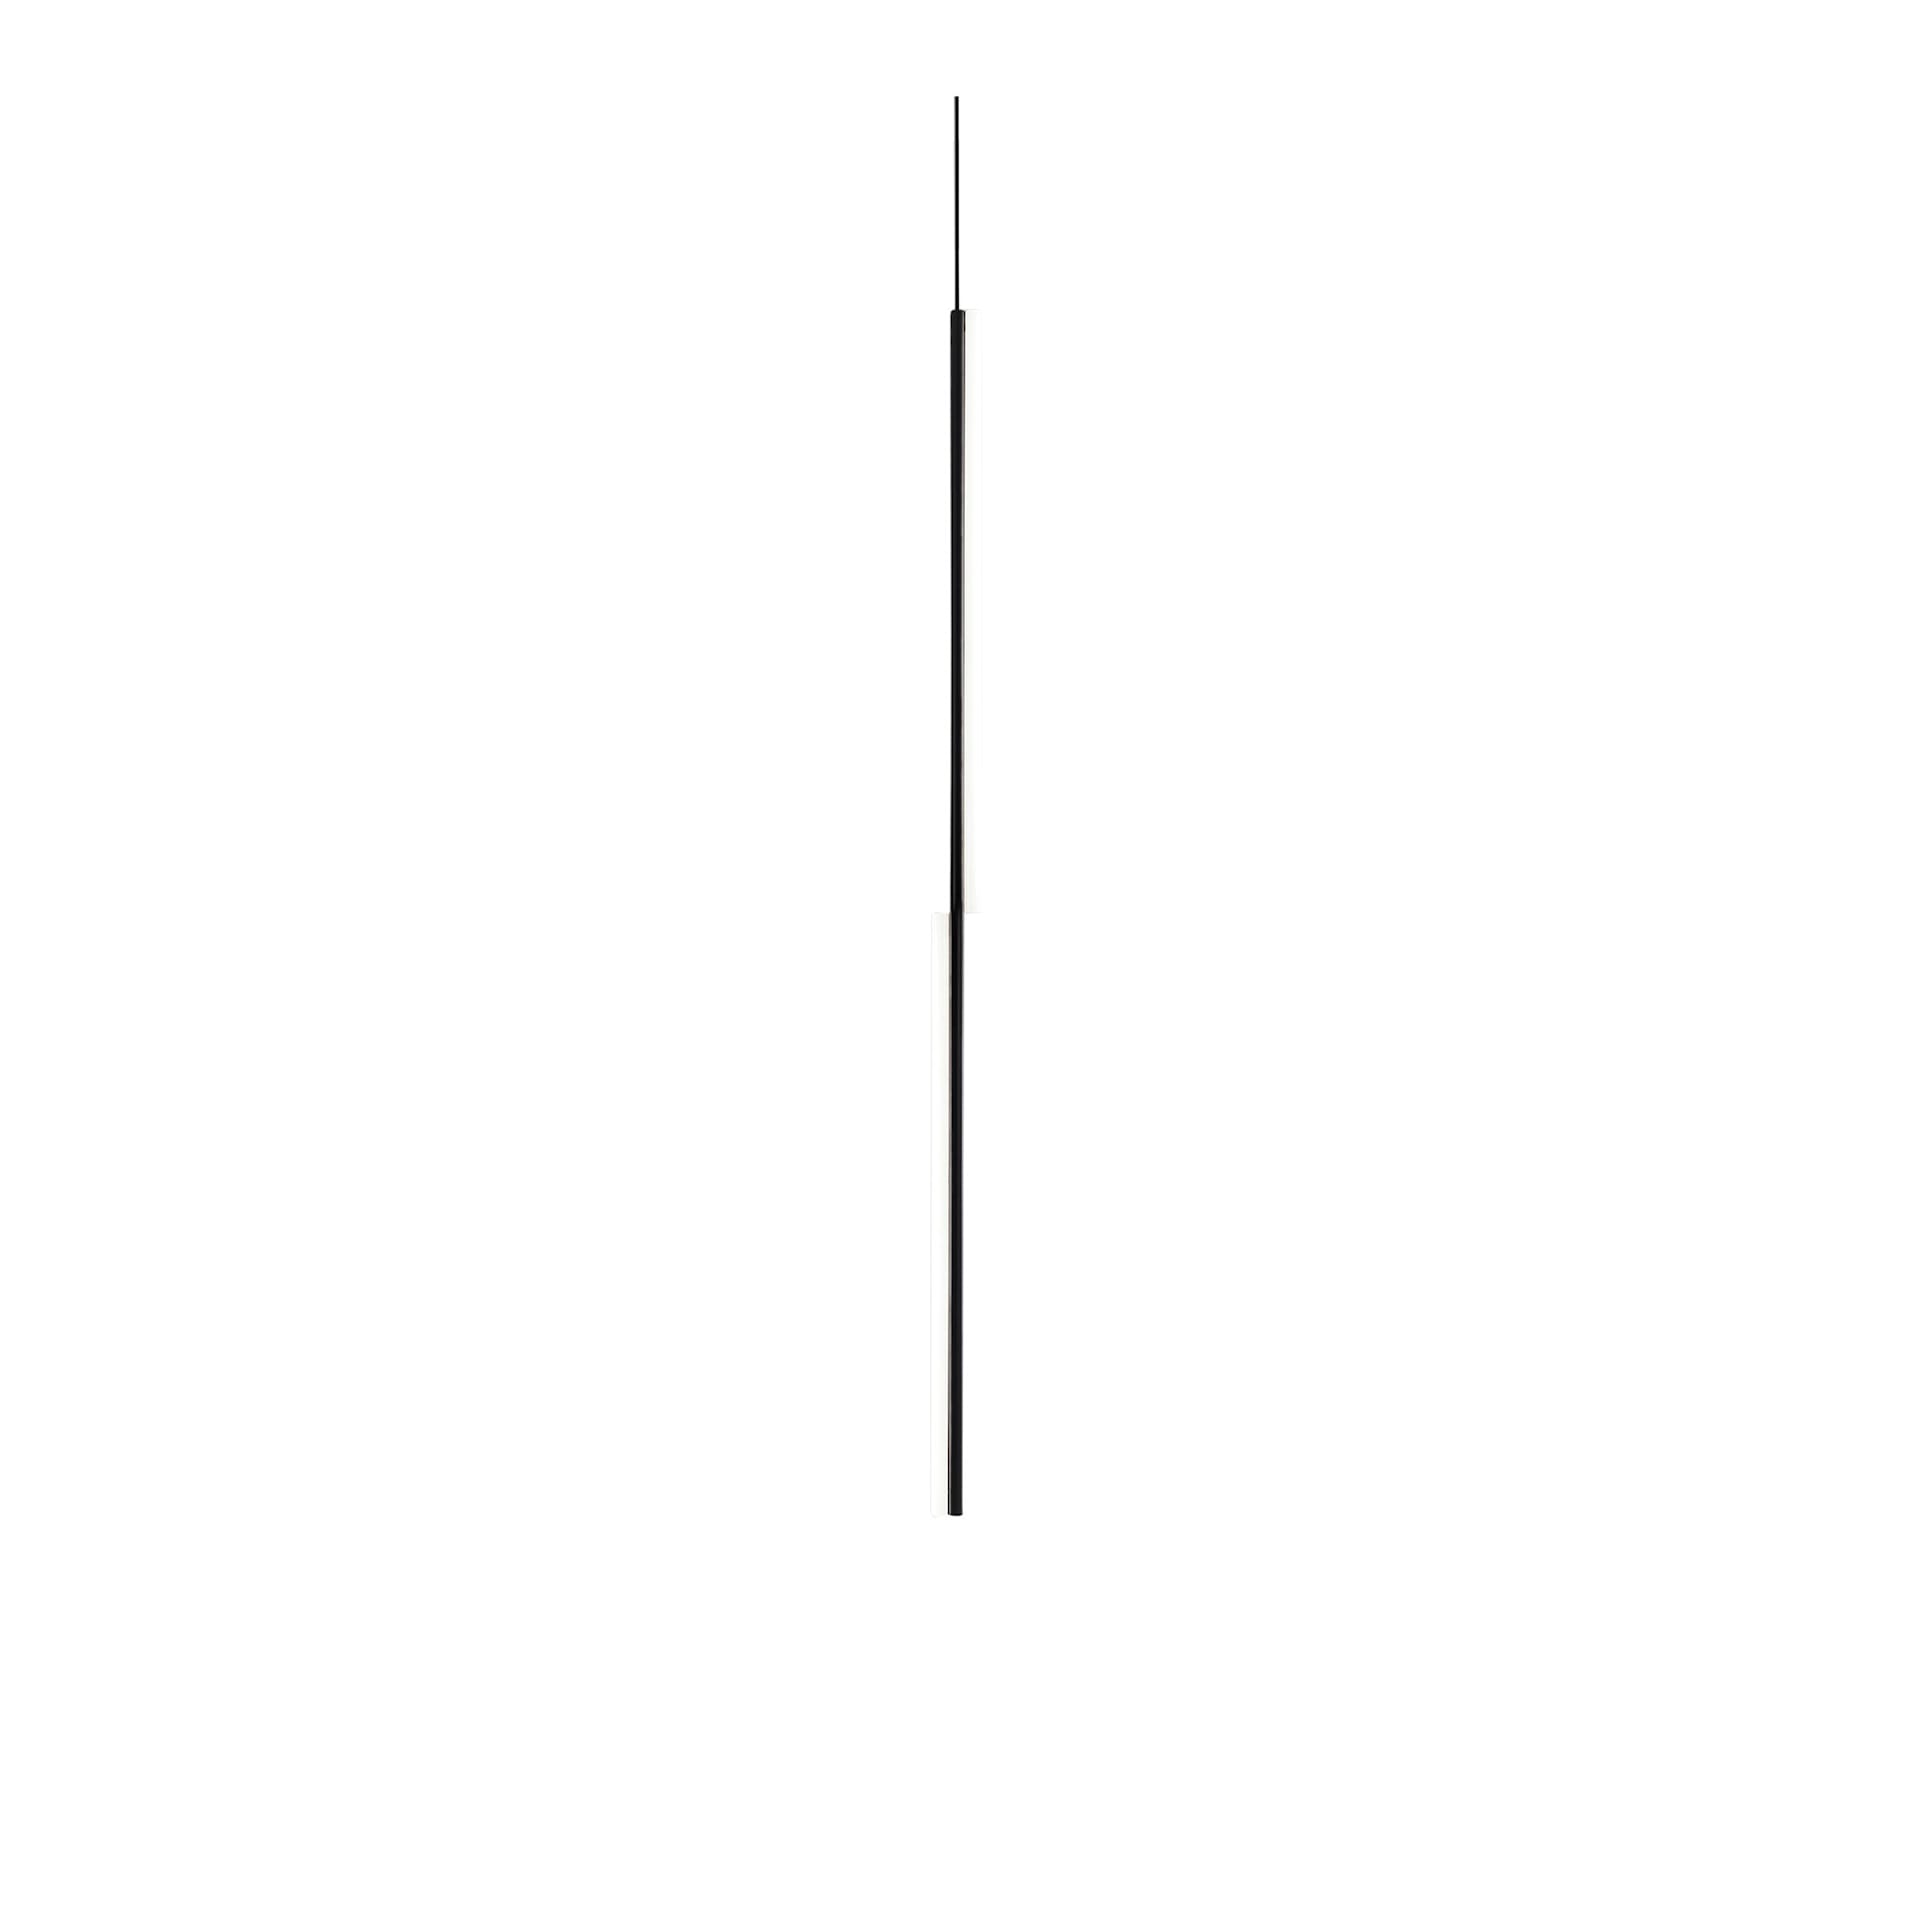 One Well Known Sequence Pendant 0101 - Michael Anastassiades - Michael Anastassiades - NO GA